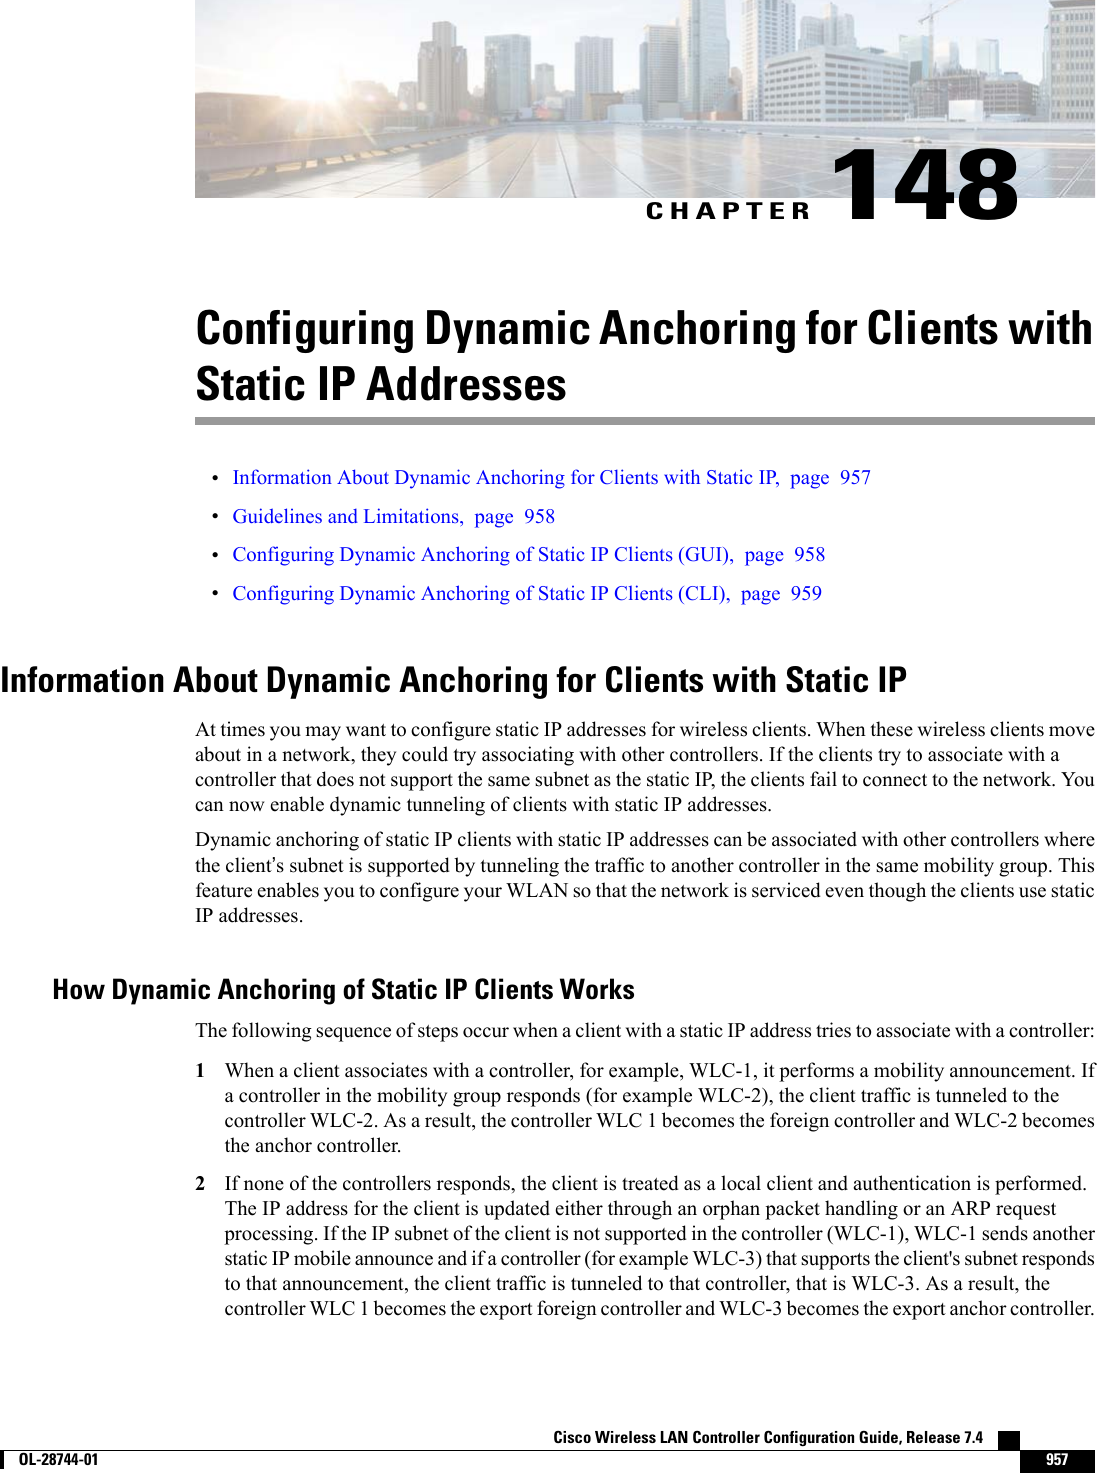 CHAPTER 148Configuring Dynamic Anchoring for Clients withStatic IP Addresses•Information About Dynamic Anchoring for Clients with Static IP, page 957•Guidelines and Limitations, page 958•Configuring Dynamic Anchoring of Static IP Clients (GUI), page 958•Configuring Dynamic Anchoring of Static IP Clients (CLI), page 959Information About Dynamic Anchoring for Clients with Static IPAt times you may want to configure static IP addresses for wireless clients. When these wireless clients moveabout in a network, they could try associating with other controllers. If the clients try to associate with acontroller that does not support the same subnet as the static IP, the clients fail to connect to the network. Youcan now enable dynamic tunneling of clients with static IP addresses.Dynamic anchoring of static IP clients with static IP addresses can be associated with other controllers wherethe client’s subnet is supported by tunneling the traffic to another controller in the same mobility group. Thisfeature enables you to configure your WLAN so that the network is serviced even though the clients use staticIP addresses.How Dynamic Anchoring of Static IP Clients WorksThe following sequence of steps occur when a client with a static IP address tries to associate with a controller:1When a client associates with a controller, for example, WLC-1, it performs a mobility announcement. Ifa controller in the mobility group responds (for example WLC-2), the client traffic is tunneled to thecontroller WLC-2. As a result, the controller WLC 1 becomes the foreign controller and WLC-2 becomesthe anchor controller.2If none of the controllers responds, the client is treated as a local client and authentication is performed.The IP address for the client is updated either through an orphan packet handling or an ARP requestprocessing. If the IP subnet of the client is not supported in the controller (WLC-1), WLC-1 sends anotherstatic IP mobile announce and if a controller (for example WLC-3) that supports the client&apos;s subnet respondsto that announcement, the client traffic is tunneled to that controller, that is WLC-3. As a result, thecontroller WLC 1 becomes the export foreign controller and WLC-3 becomes the export anchor controller.Cisco Wireless LAN Controller Configuration Guide, Release 7.4        OL-28744-01 957